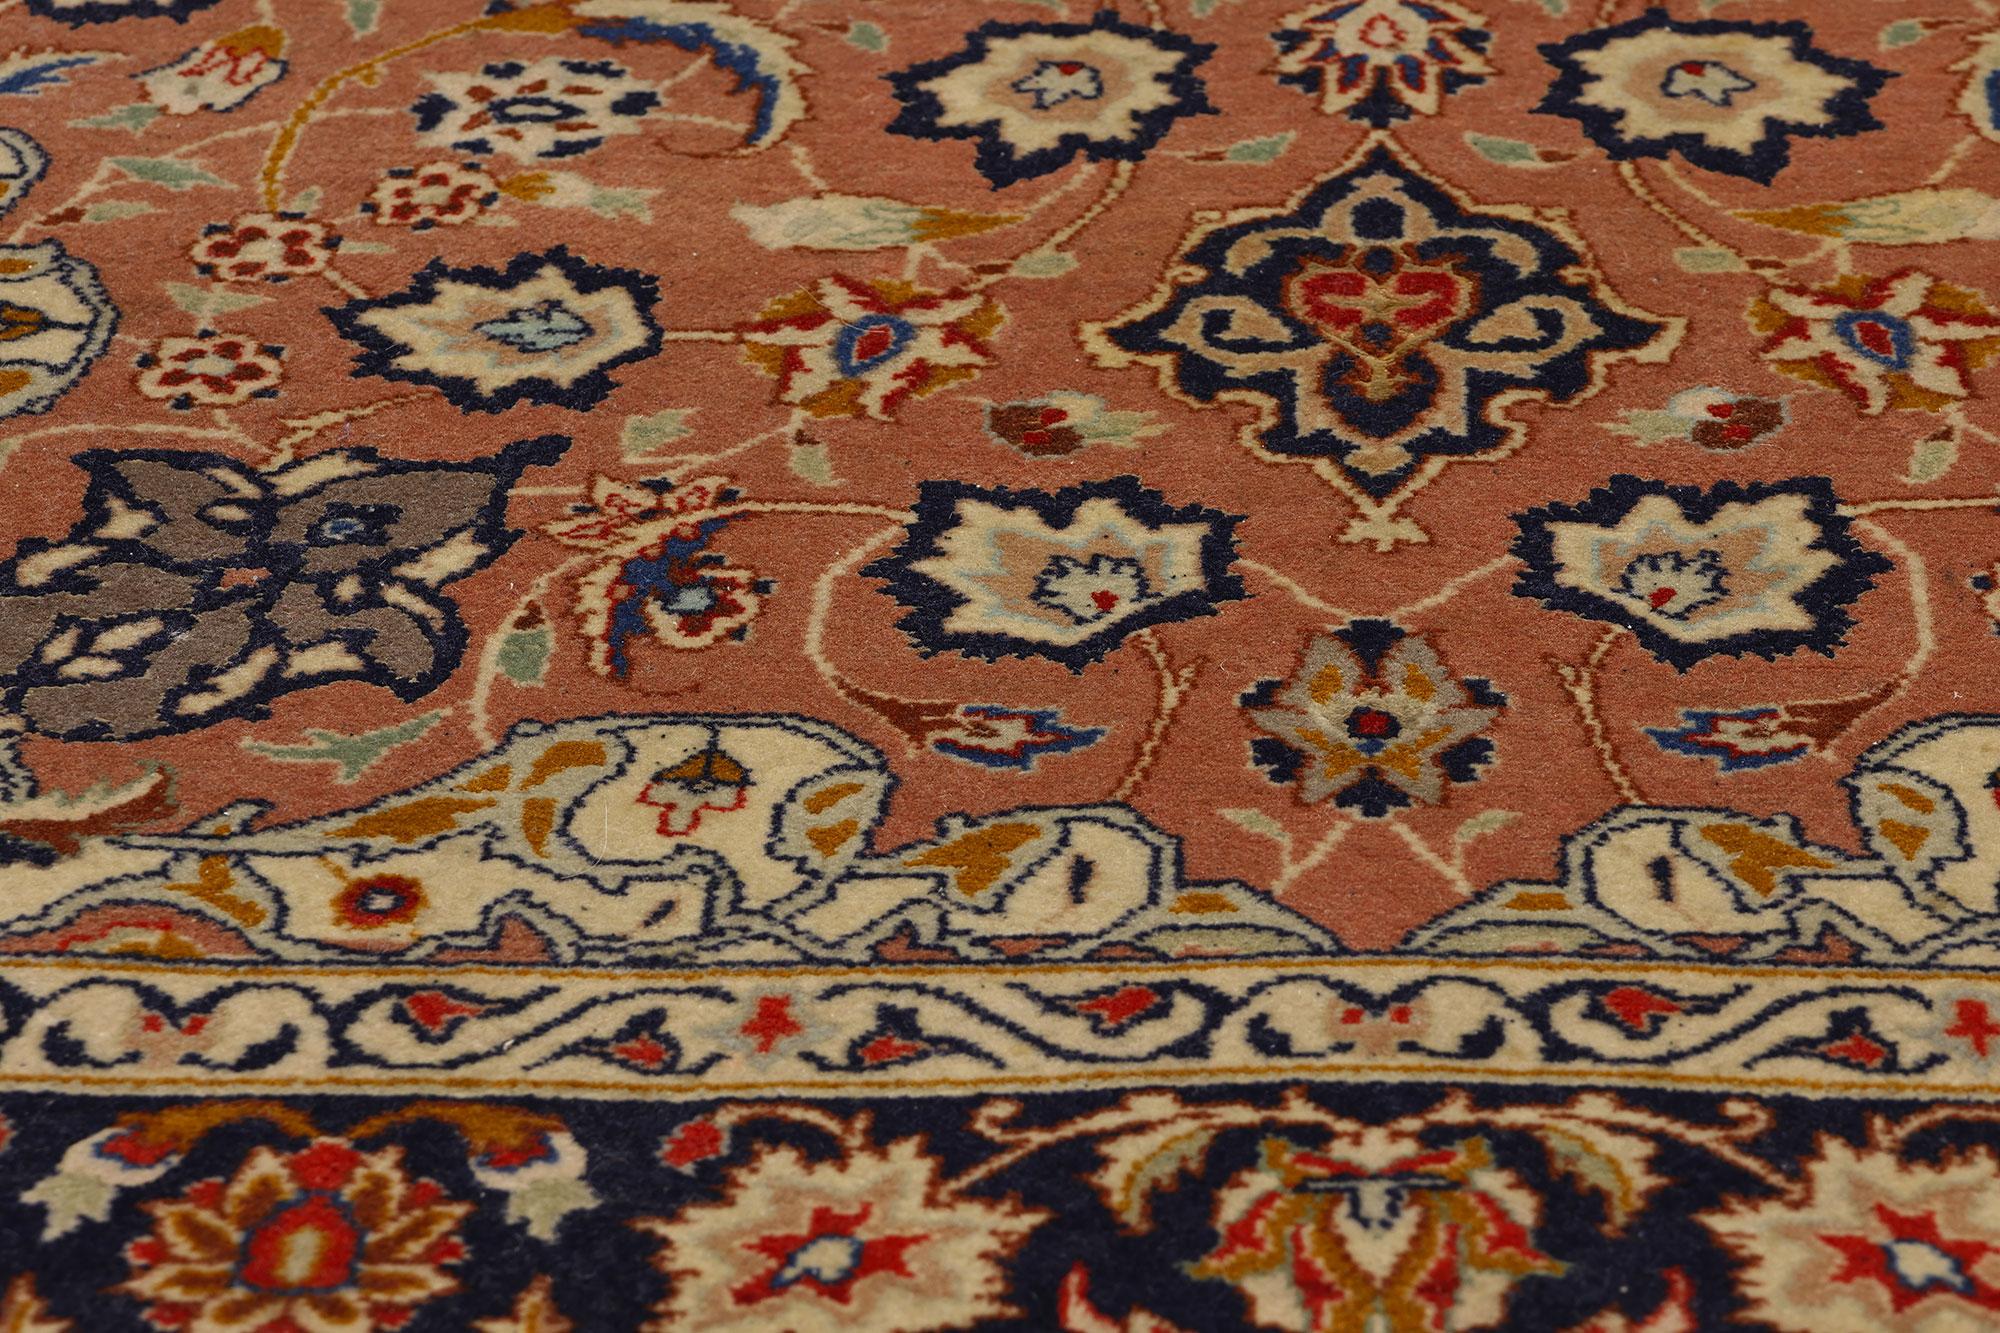 1970s Vintage Persian Tabriz Rug, Timeless Elegance Meets Historical Richness In Good Condition For Sale In Dallas, TX